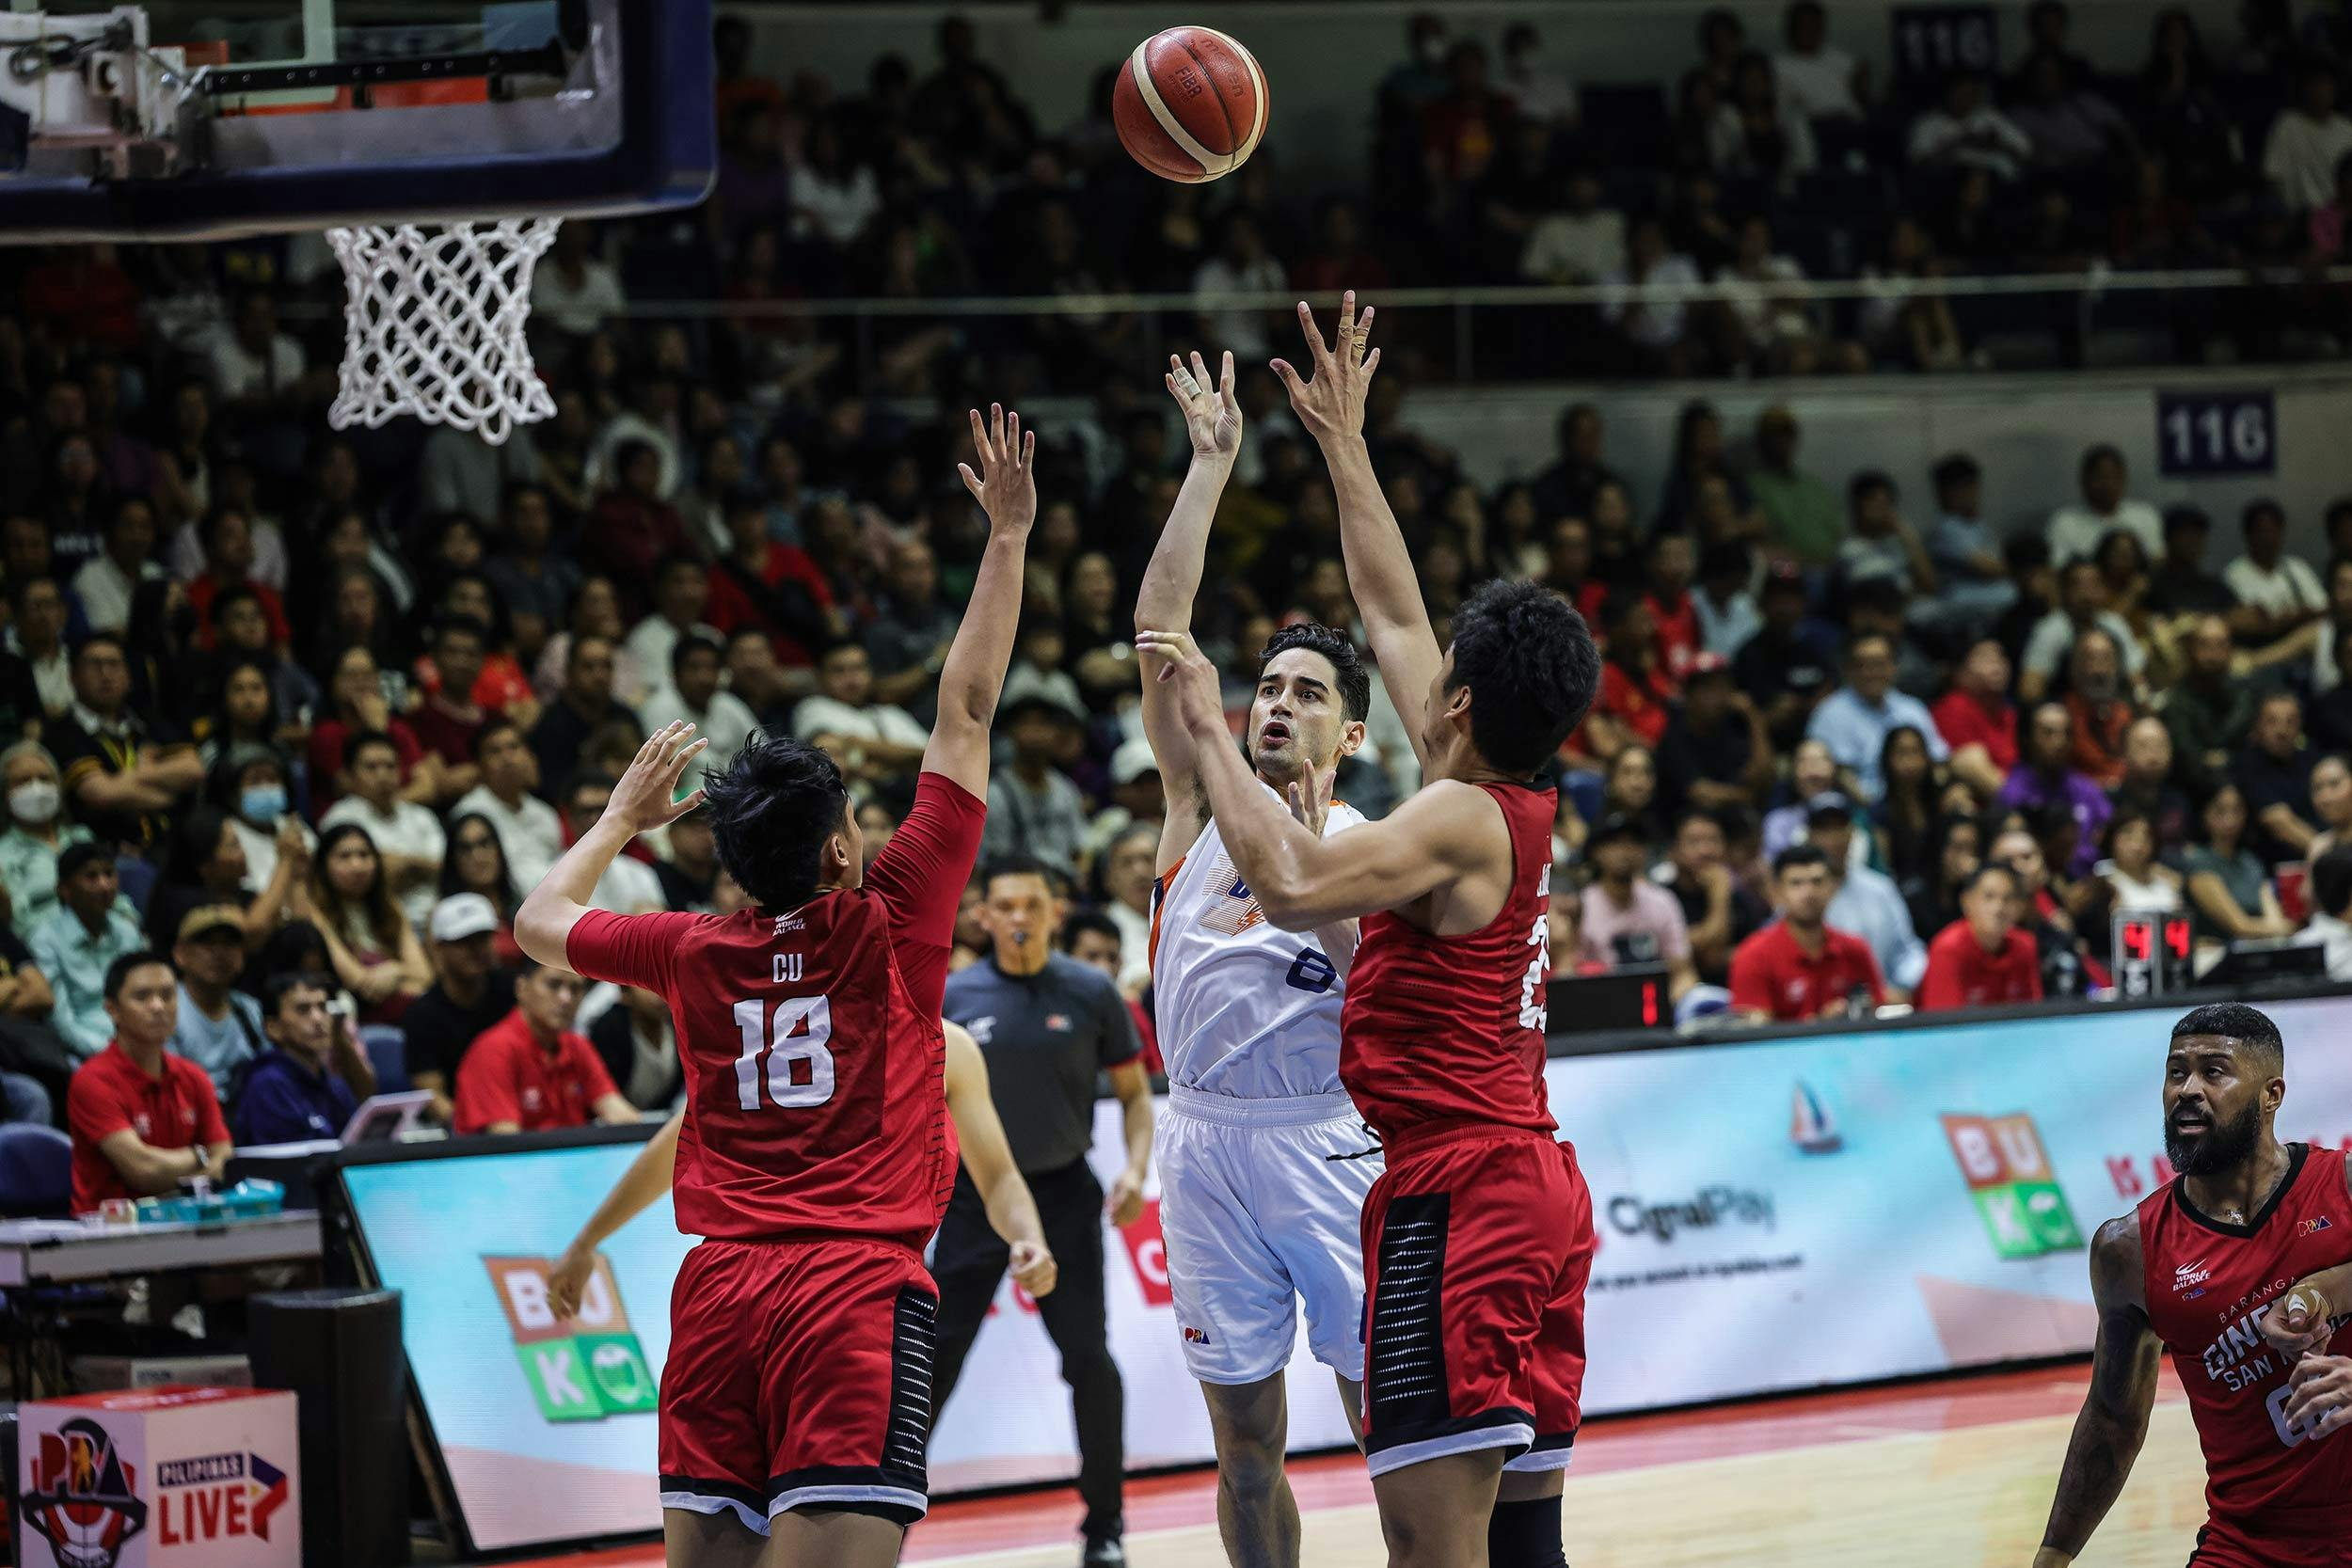 PBA: MVP pep talk gives Meralco much-needed boost, belief en route to Game 7 win over Ginebra